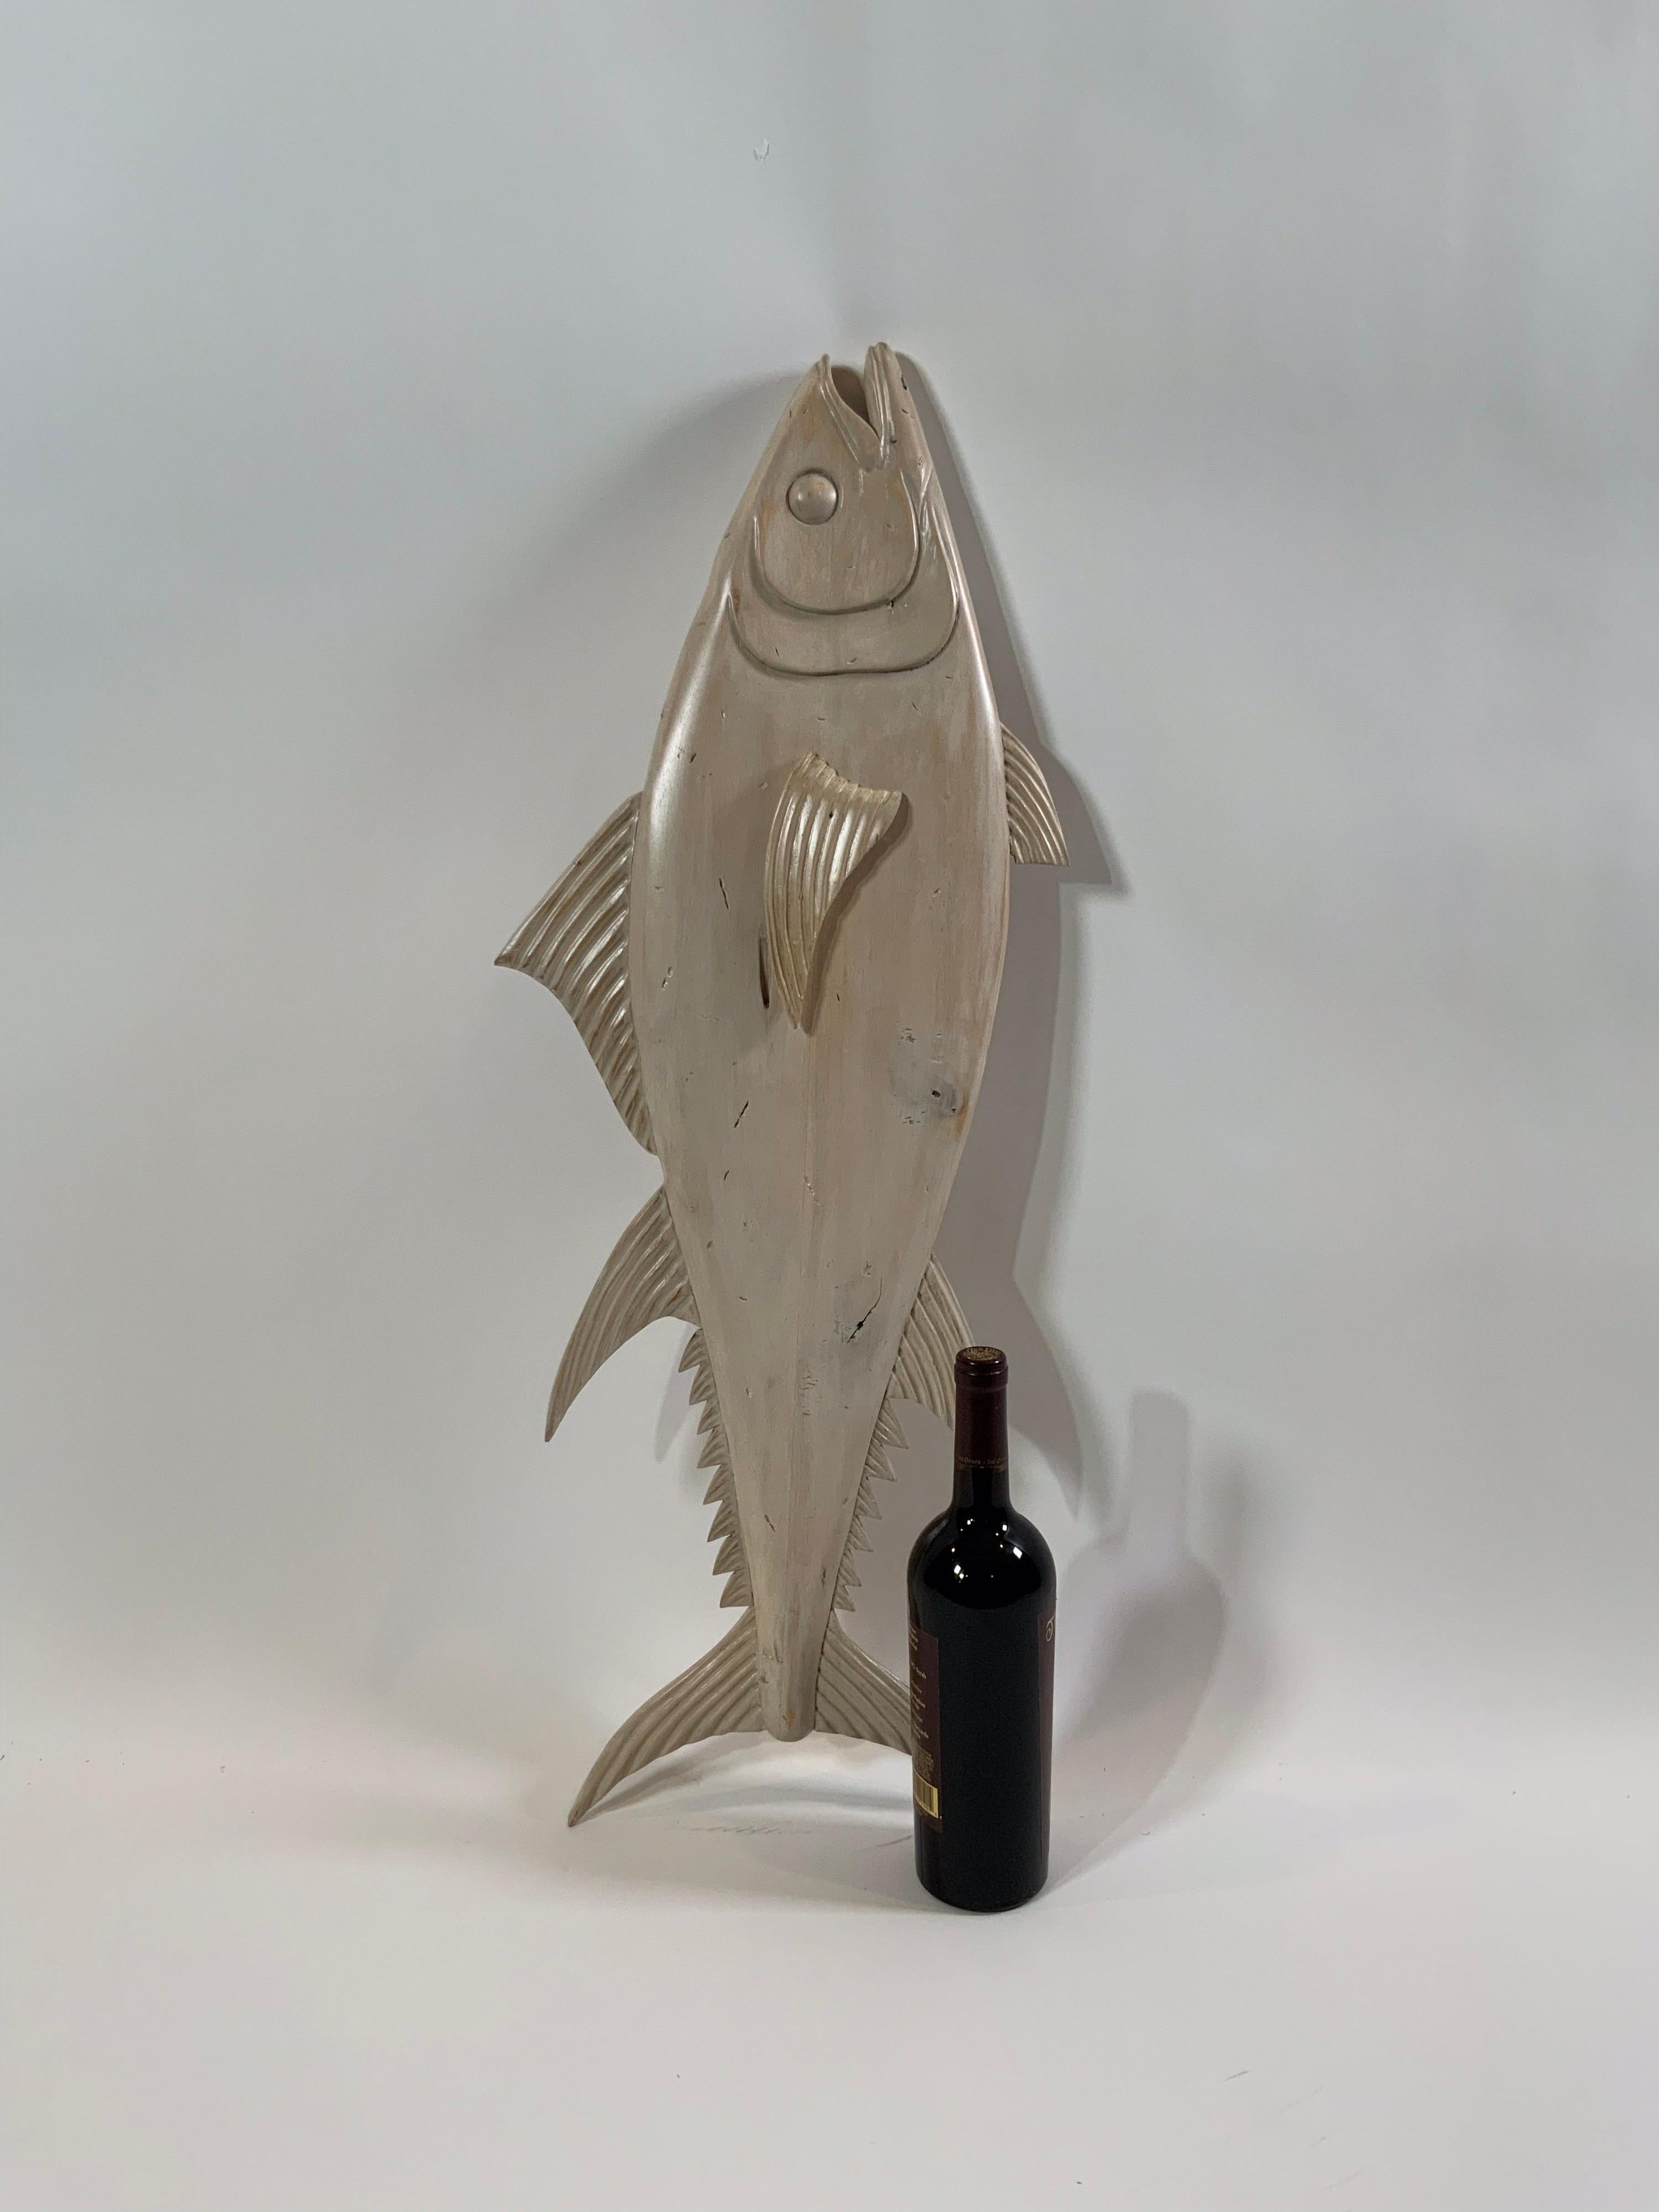 Hand carved hanging tuna fish. Awesome carved tuna with hand rubbed pickled finish. This finish is rubbed in through about a one hundred step process of stain, paint, sand finish, sand, repeat. The result is this fabulous hand carved and finished